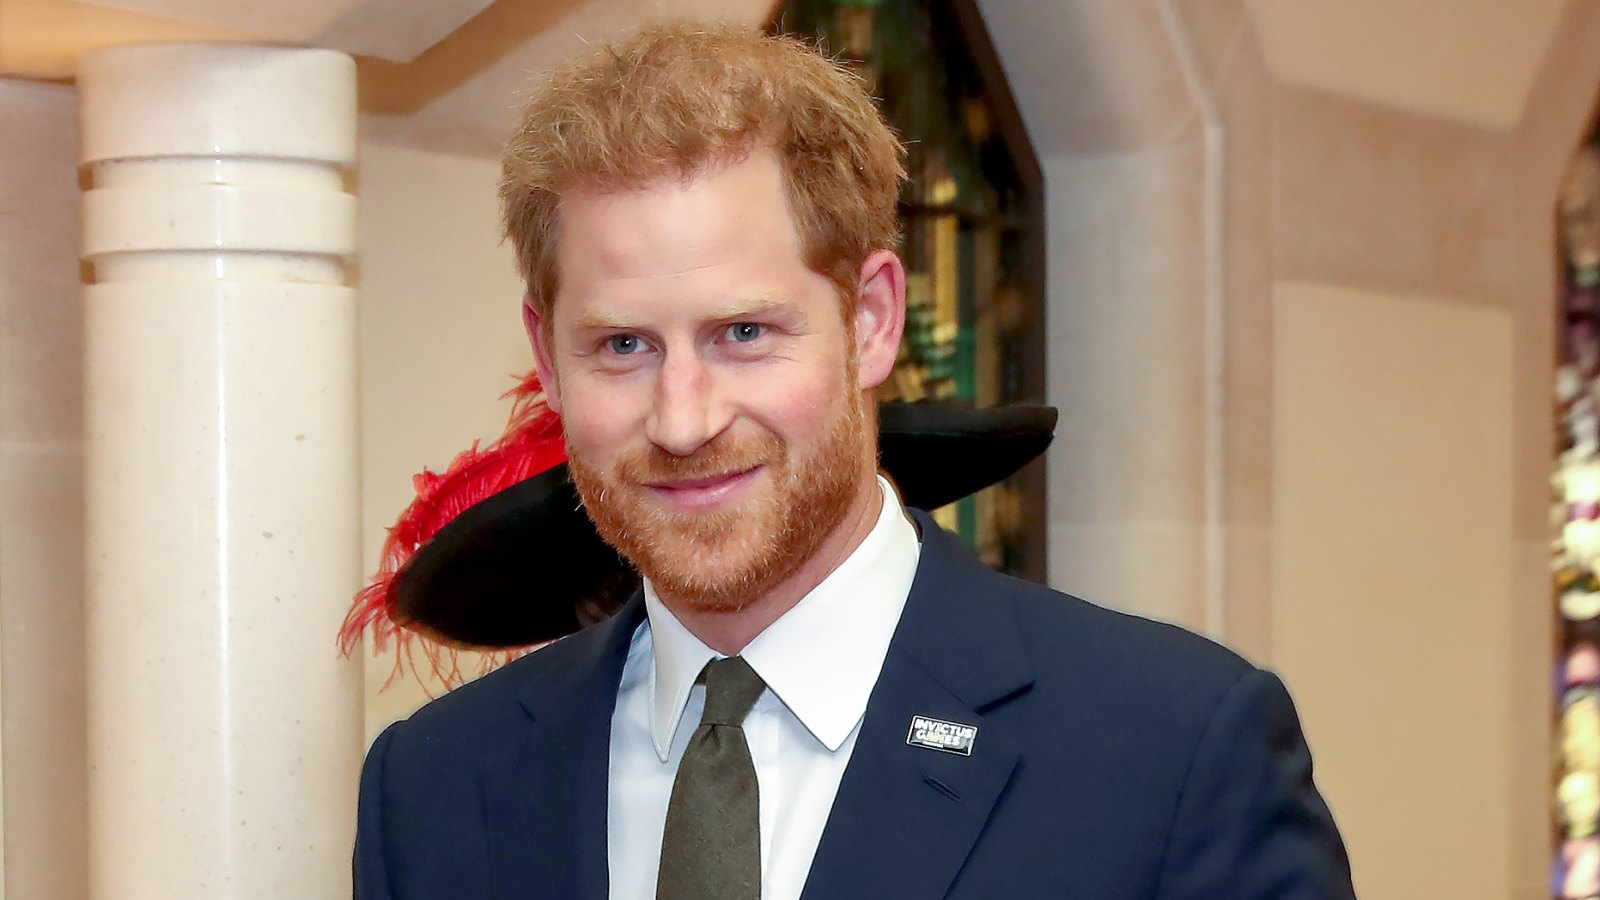 Prince Harry Shares Message for Invictus Games Athletes Amid COVID-19 Crisis